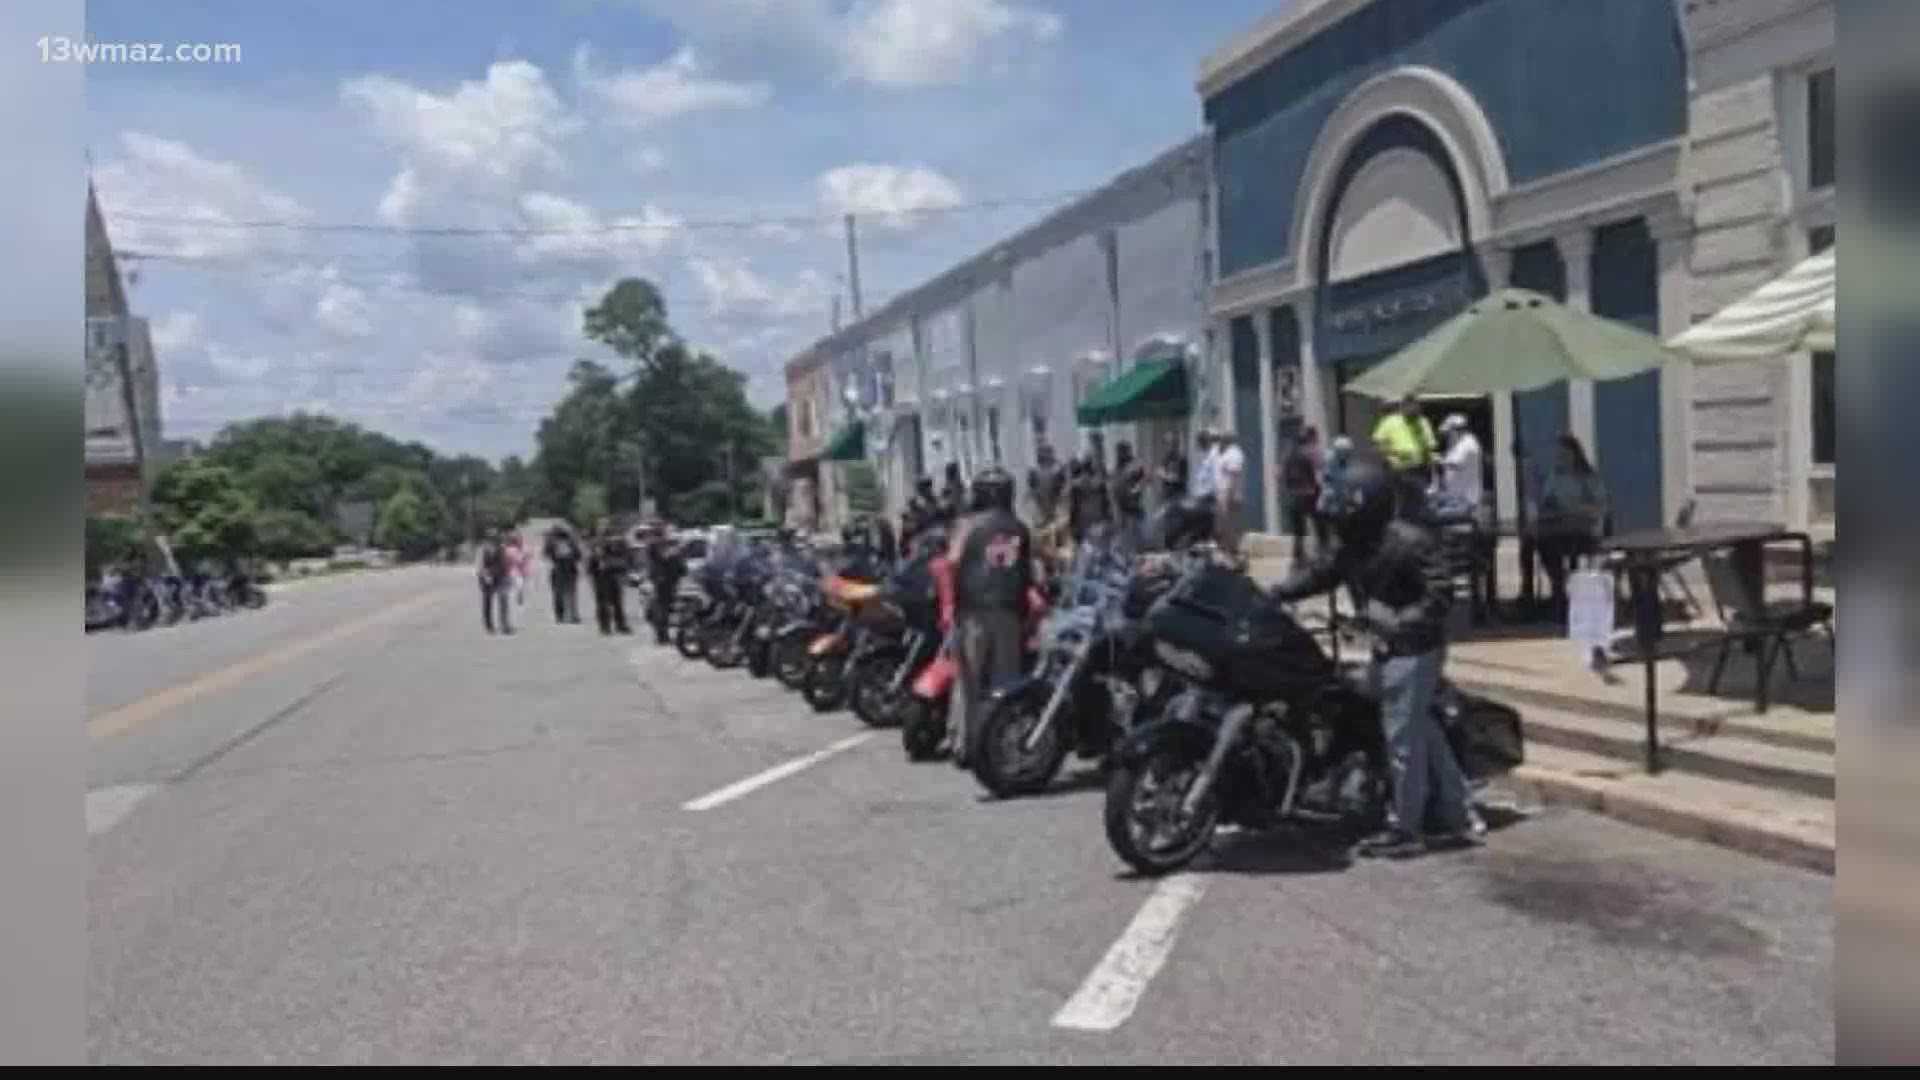 The Bykr Broz of Middle Georgia make it their mission to help others through charity ride, cookouts, and other fundraisers, and this weekend, they'll be at it again.